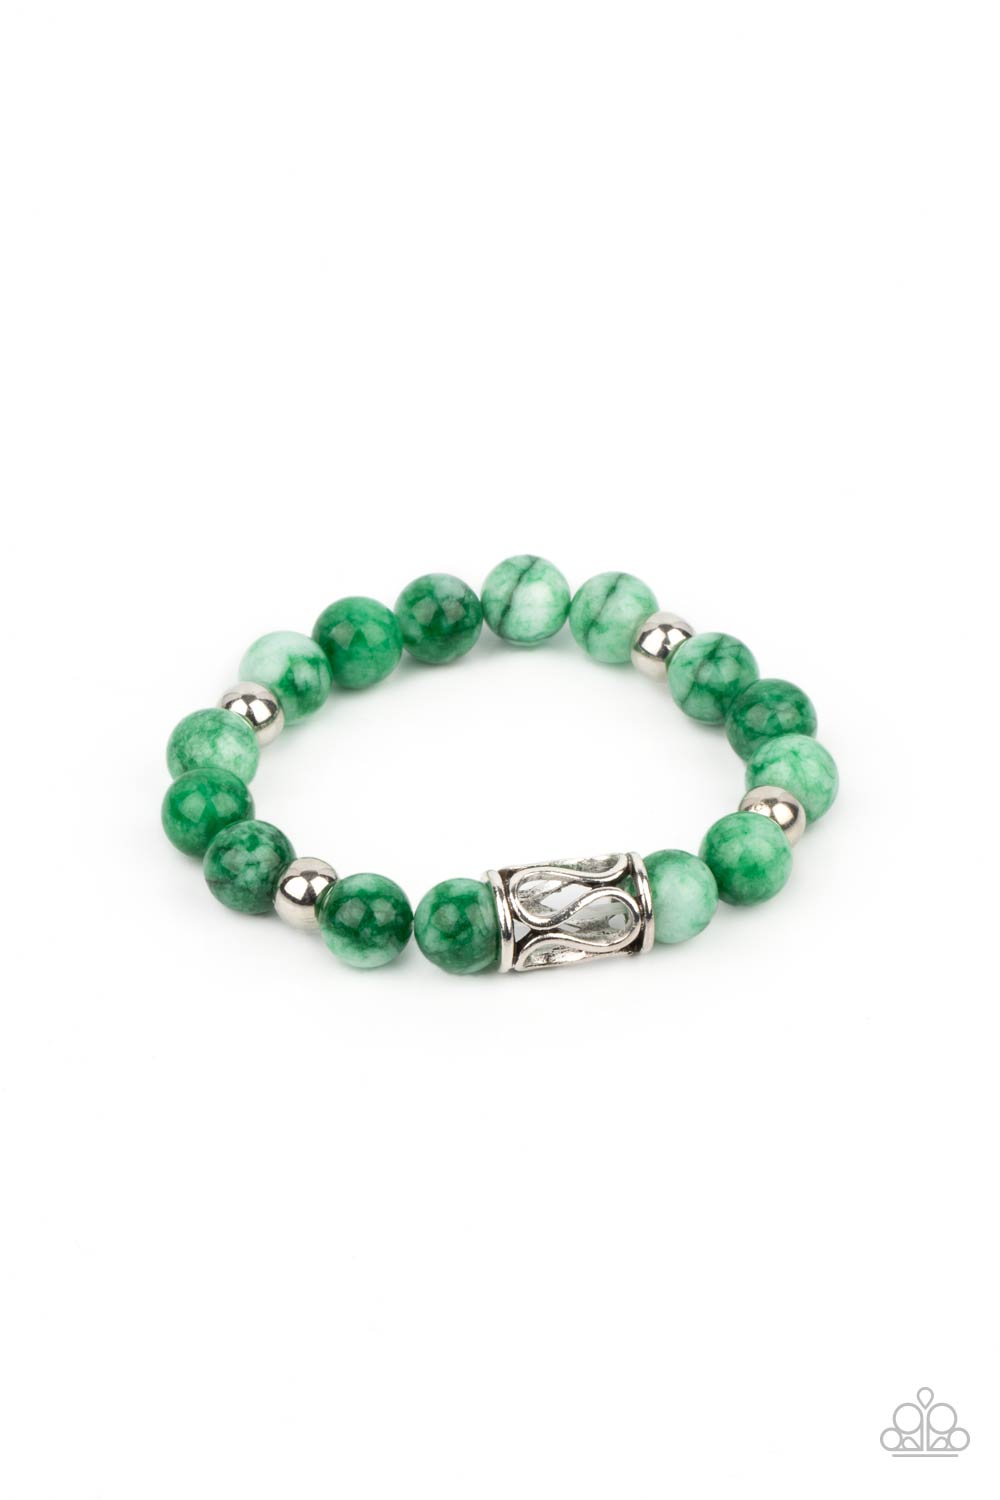 Infused with an ornate silver centerpiece, an earthy collection of silver and jade beads are threaded along a stretchy band around the wrist for a seasonal flair.